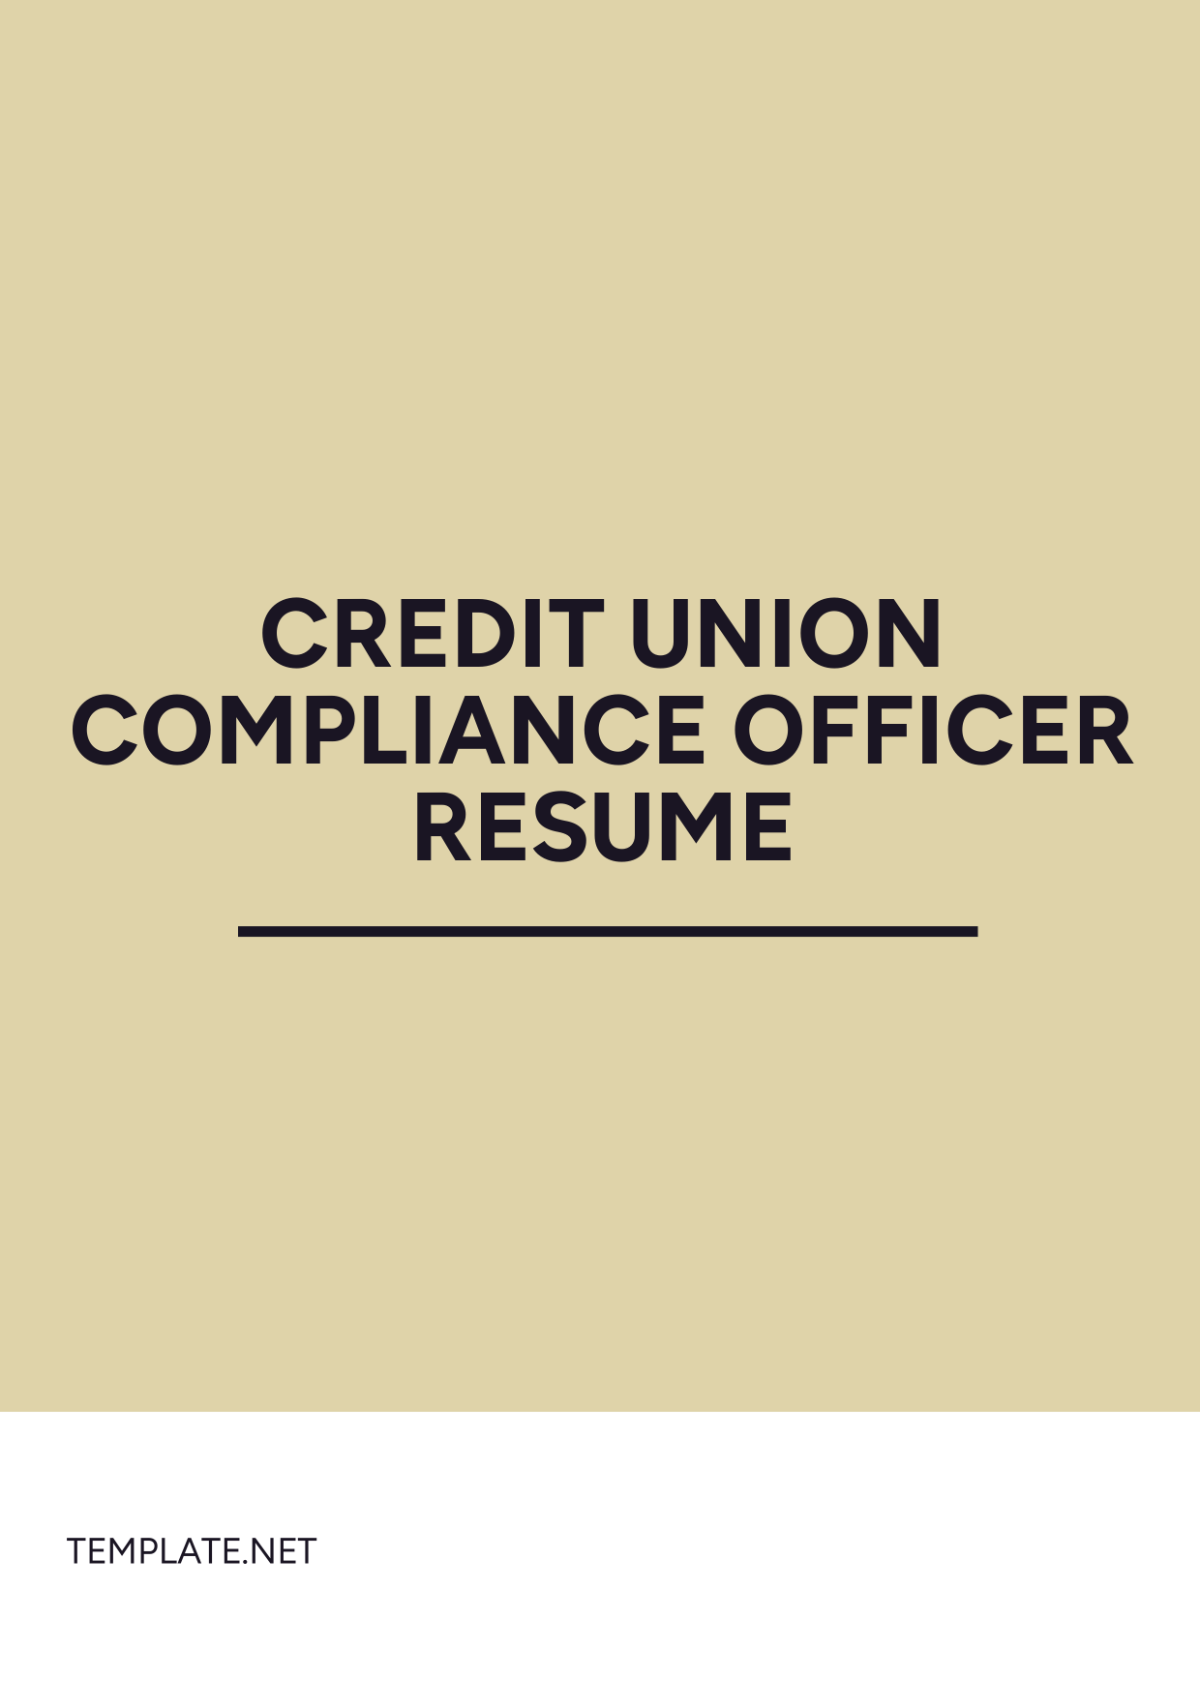 Free Credit Union Compliance Officer Resume Template